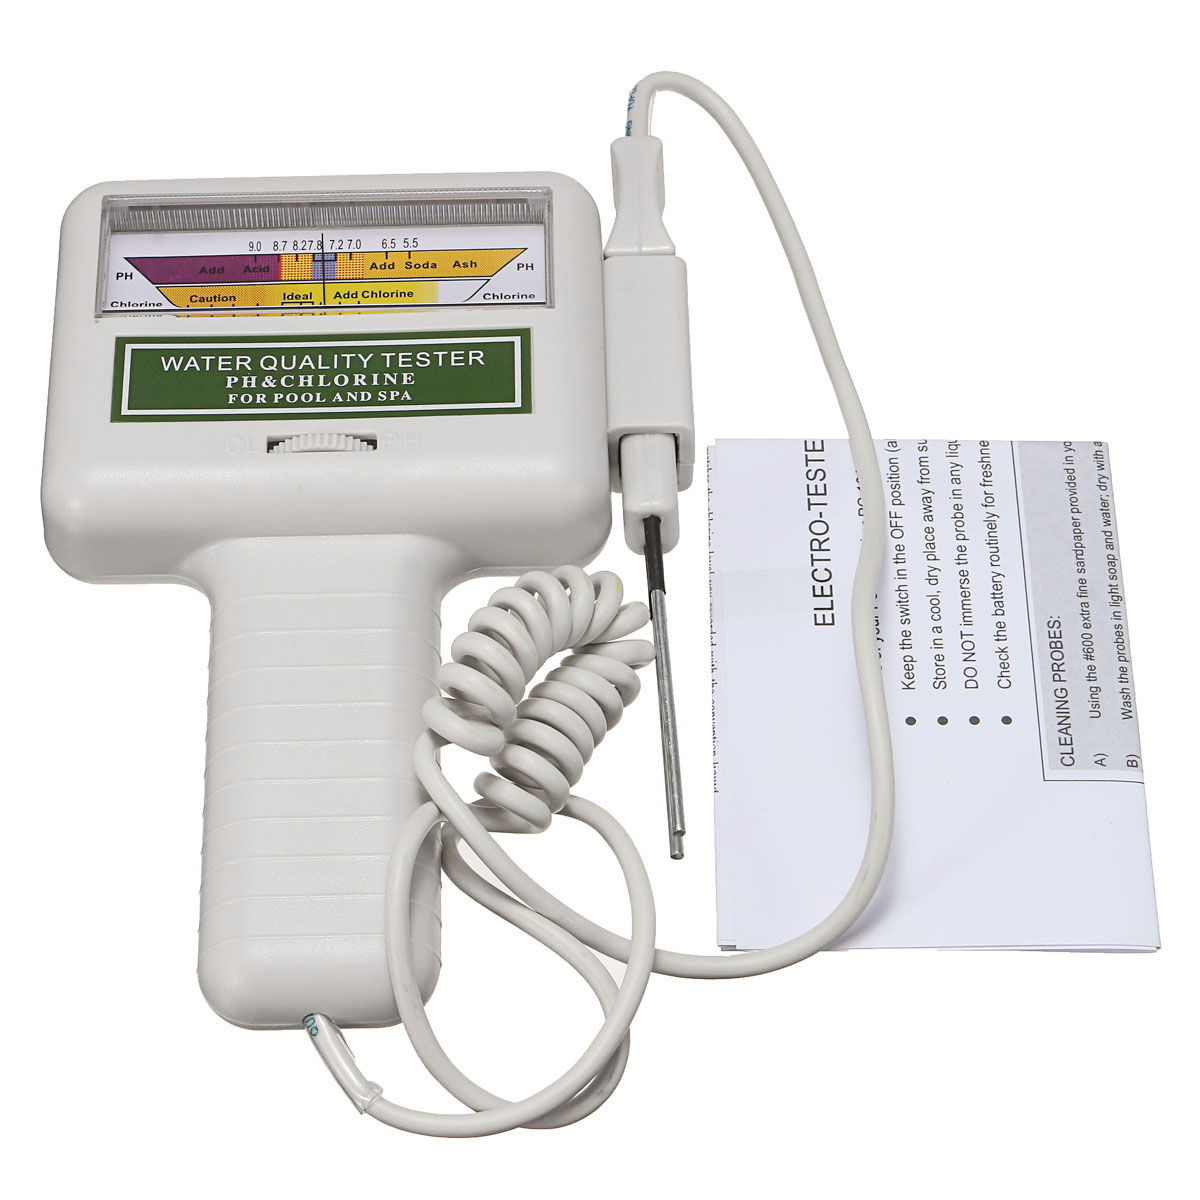 PC101-Water-Quality-Tester-PH-CL2-Chlorine-Level-Meter-Monitor-Swimming-Pool-Spa-Tester-1284004